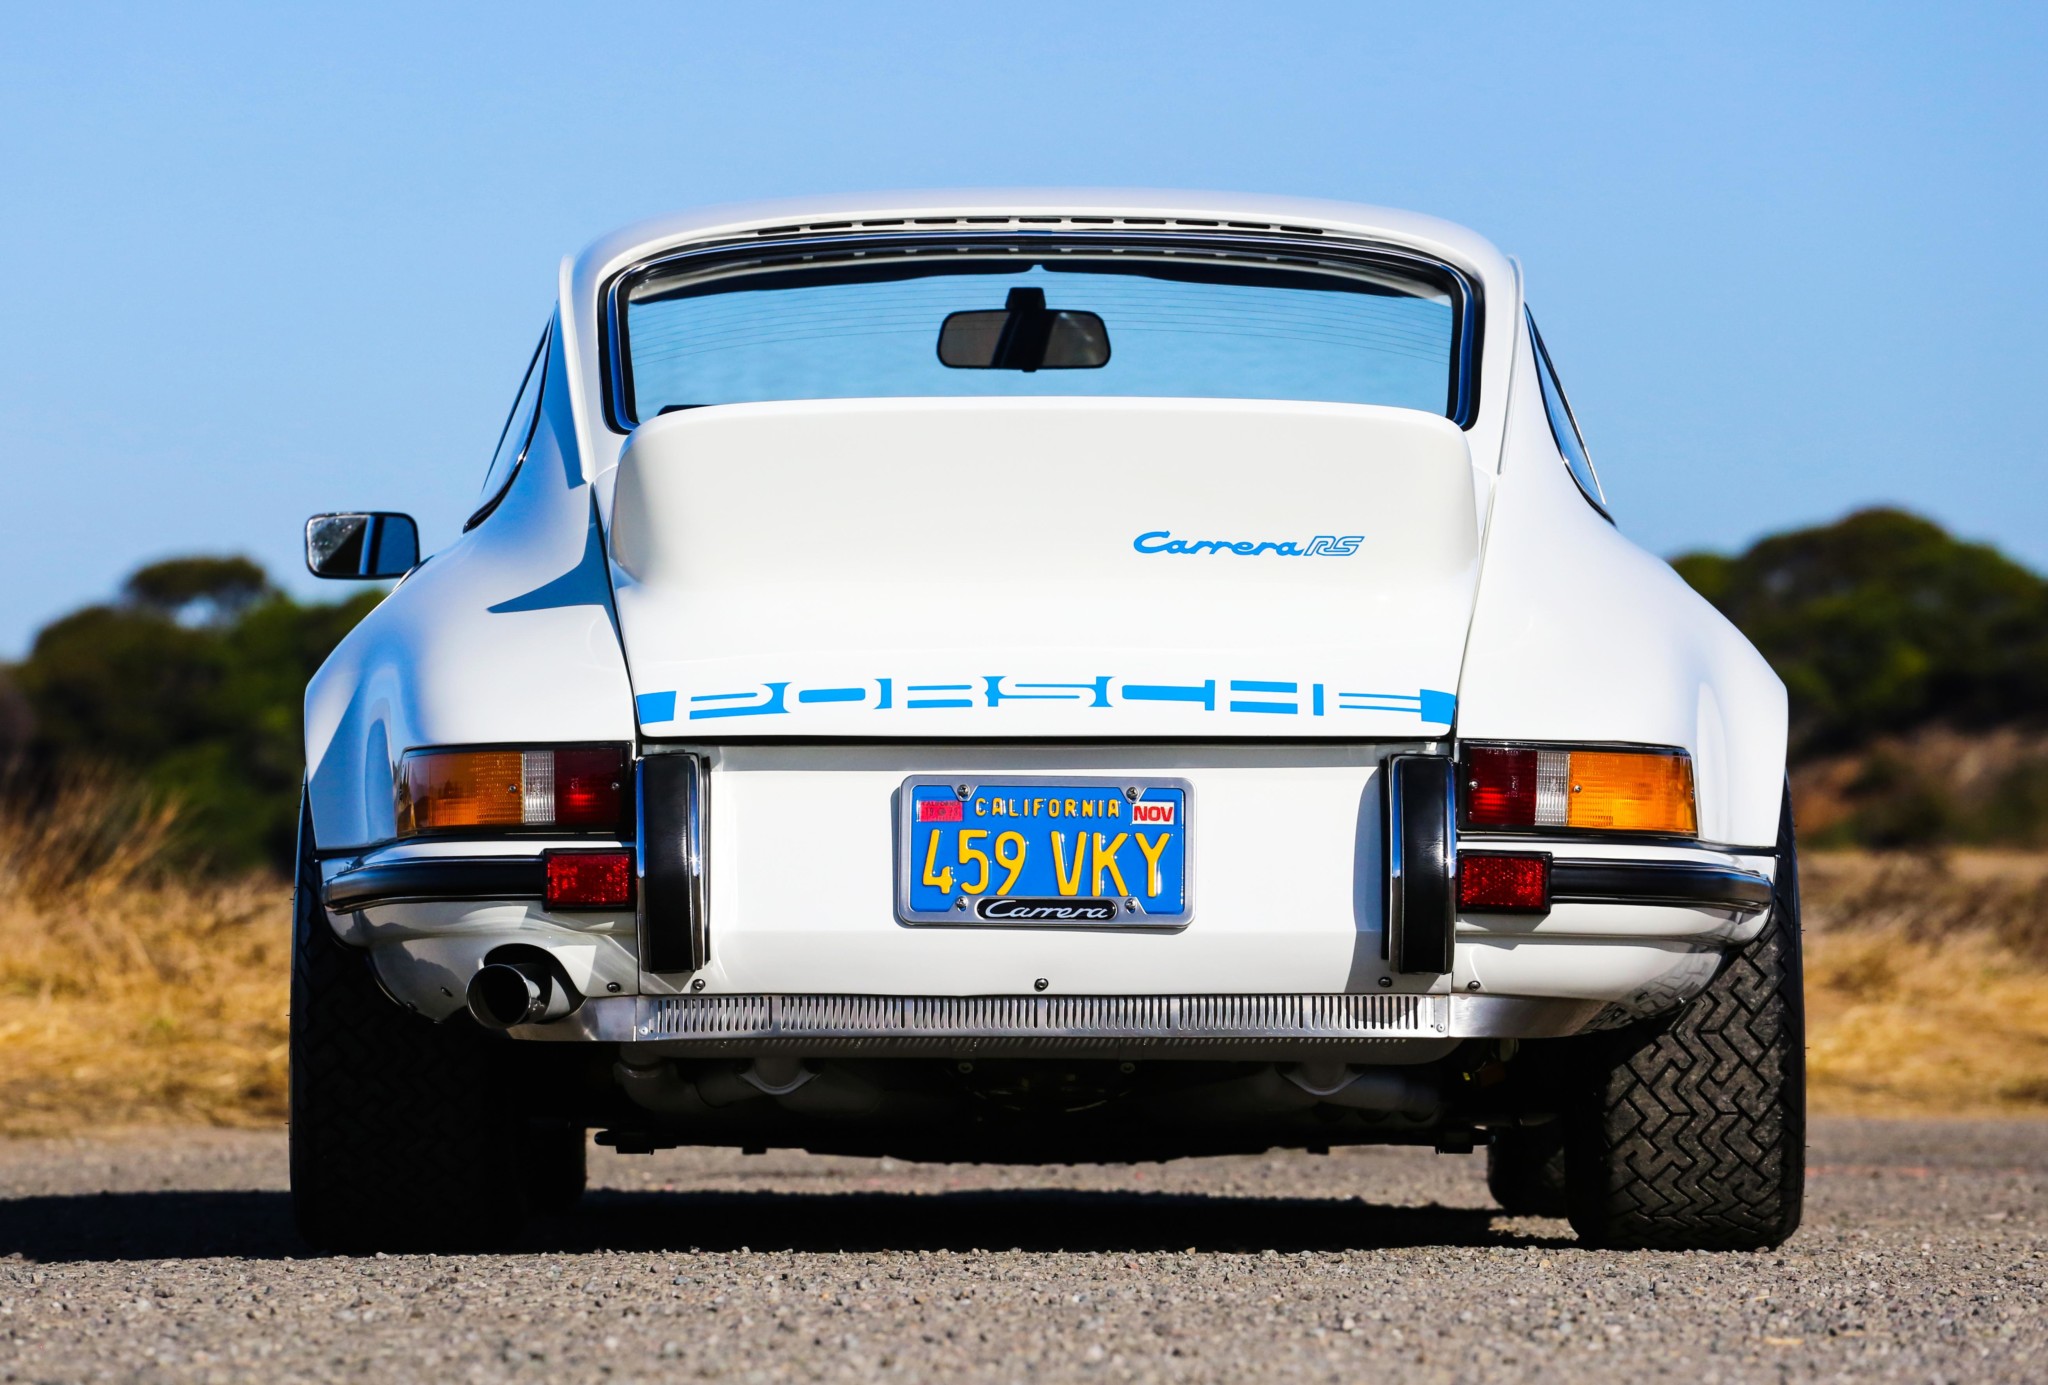 Award-Winning 1973 Porsche 911 Carrera RS Is A White And Blue Gem |  Carscoops